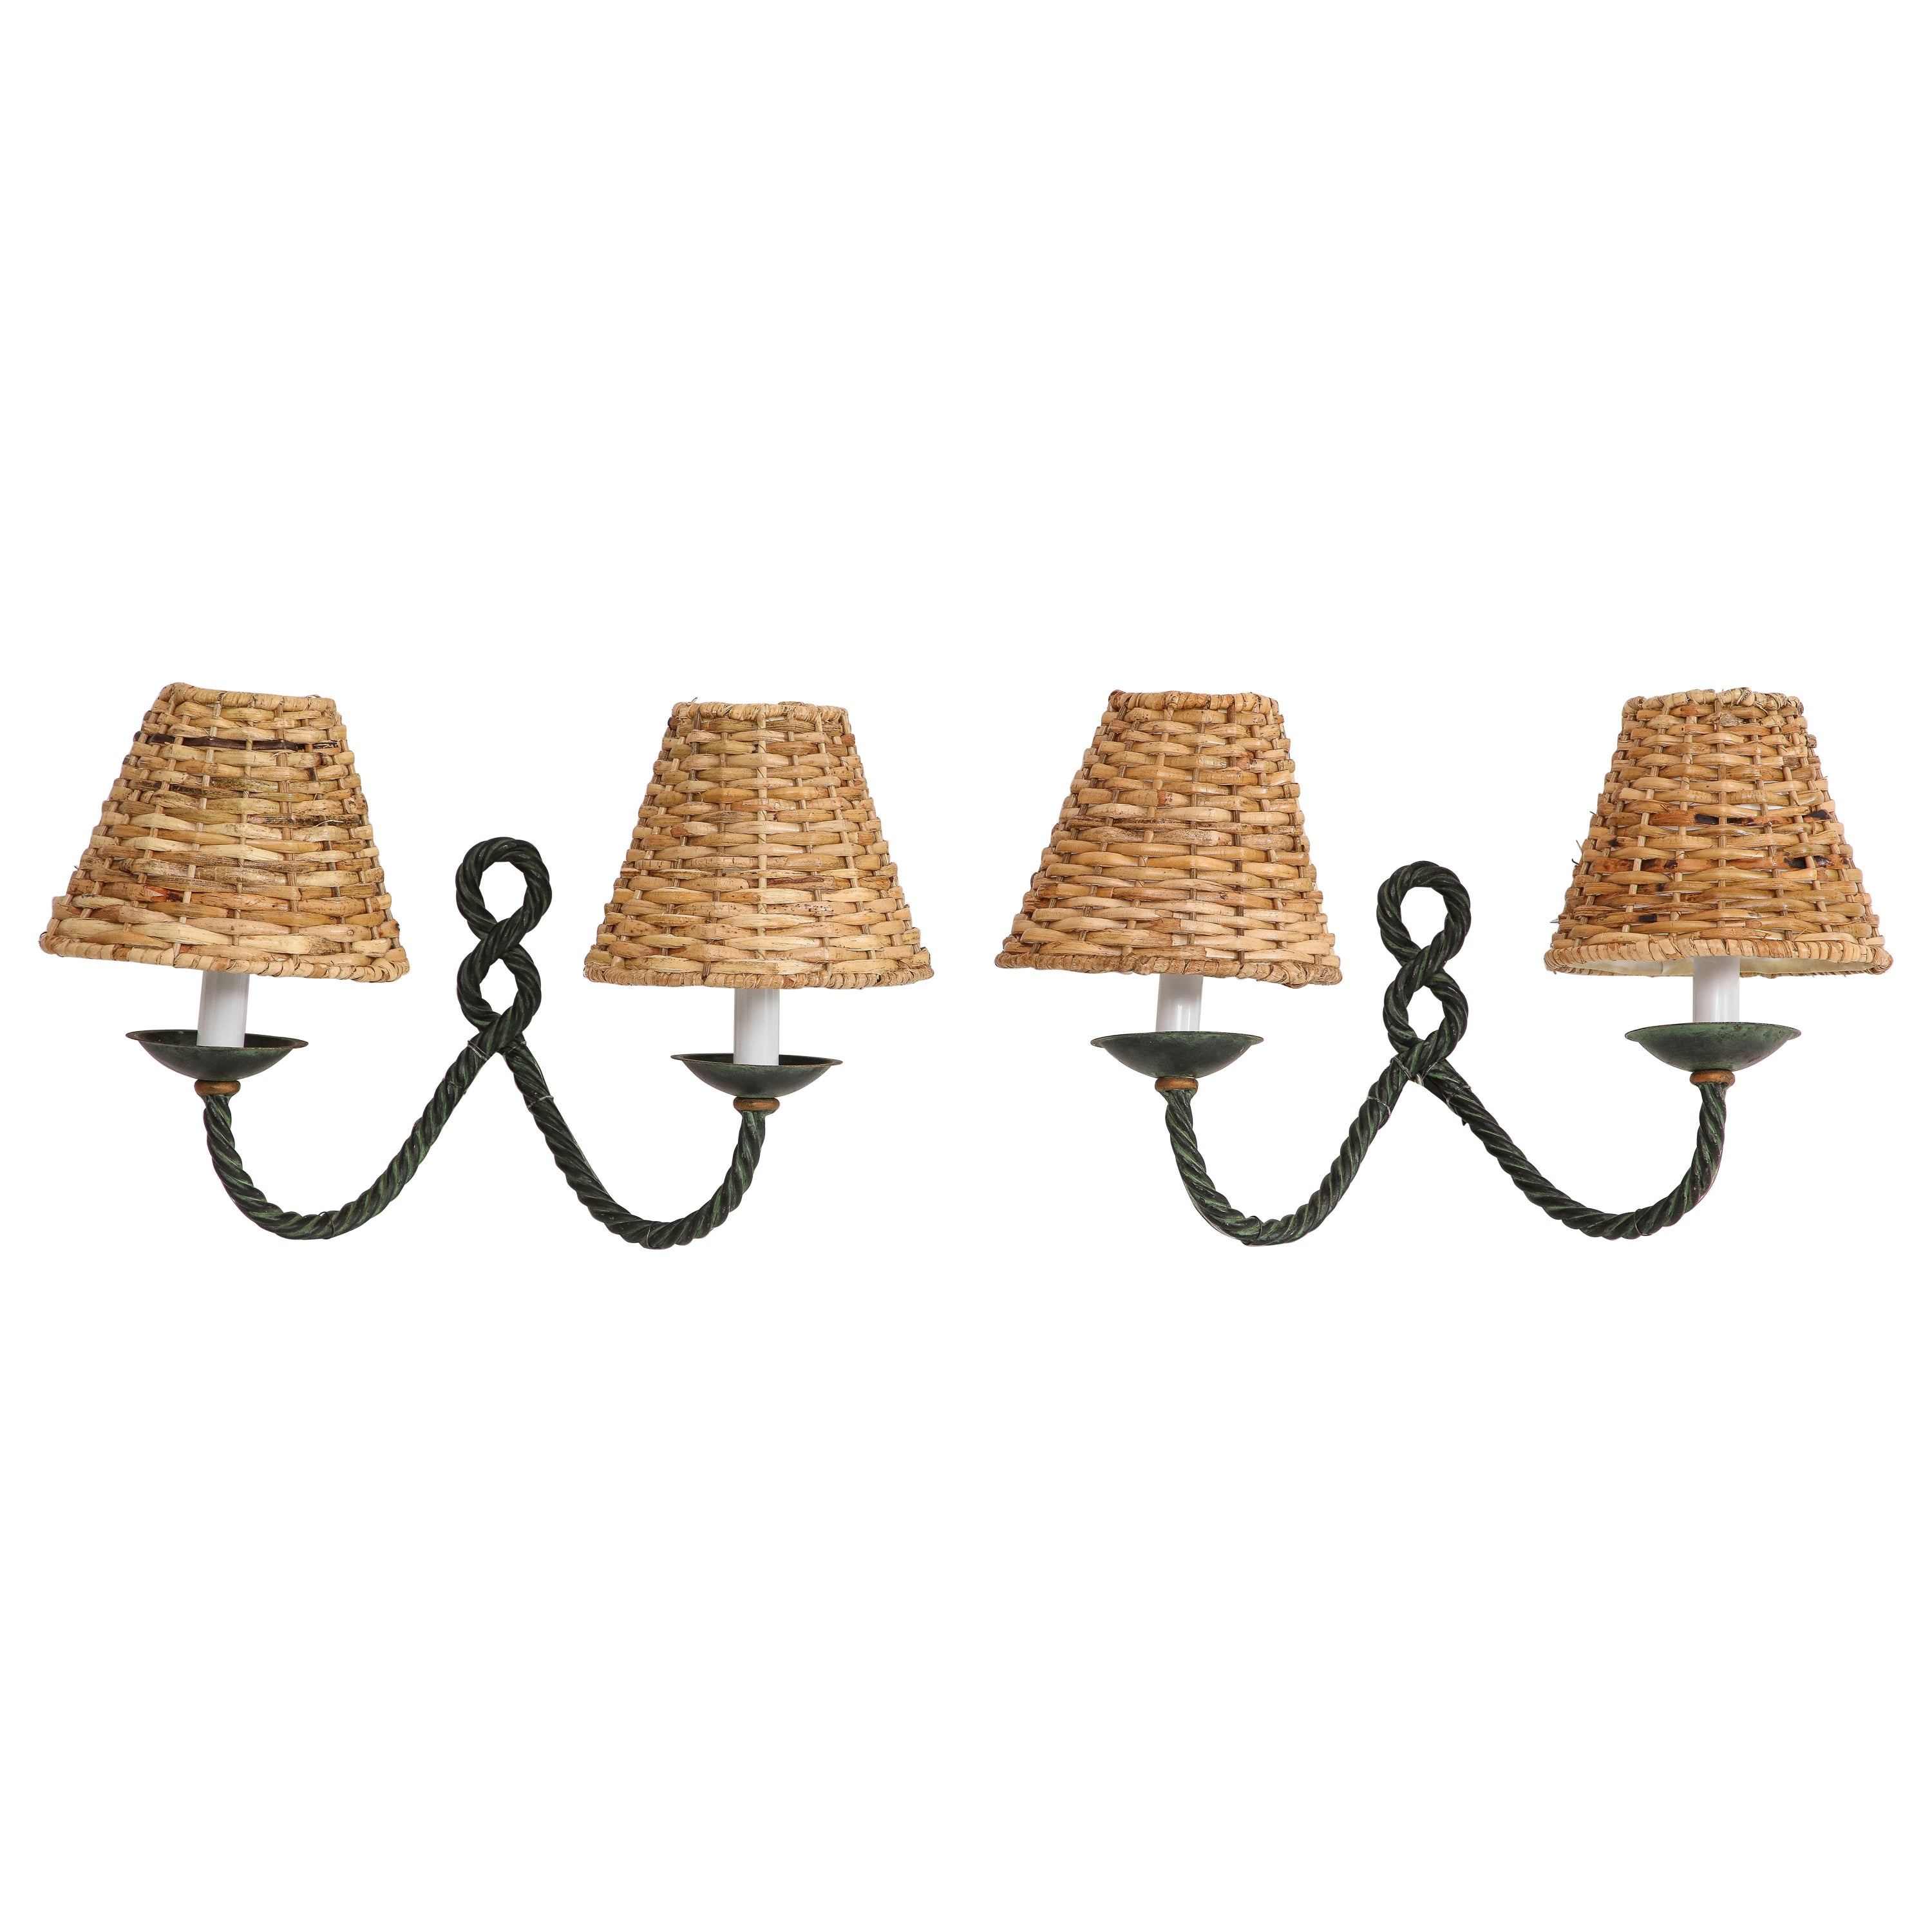 Pair of Midcentury French Bronze Rope Wall Two-Light Sconces with Wicker Shades For Sale